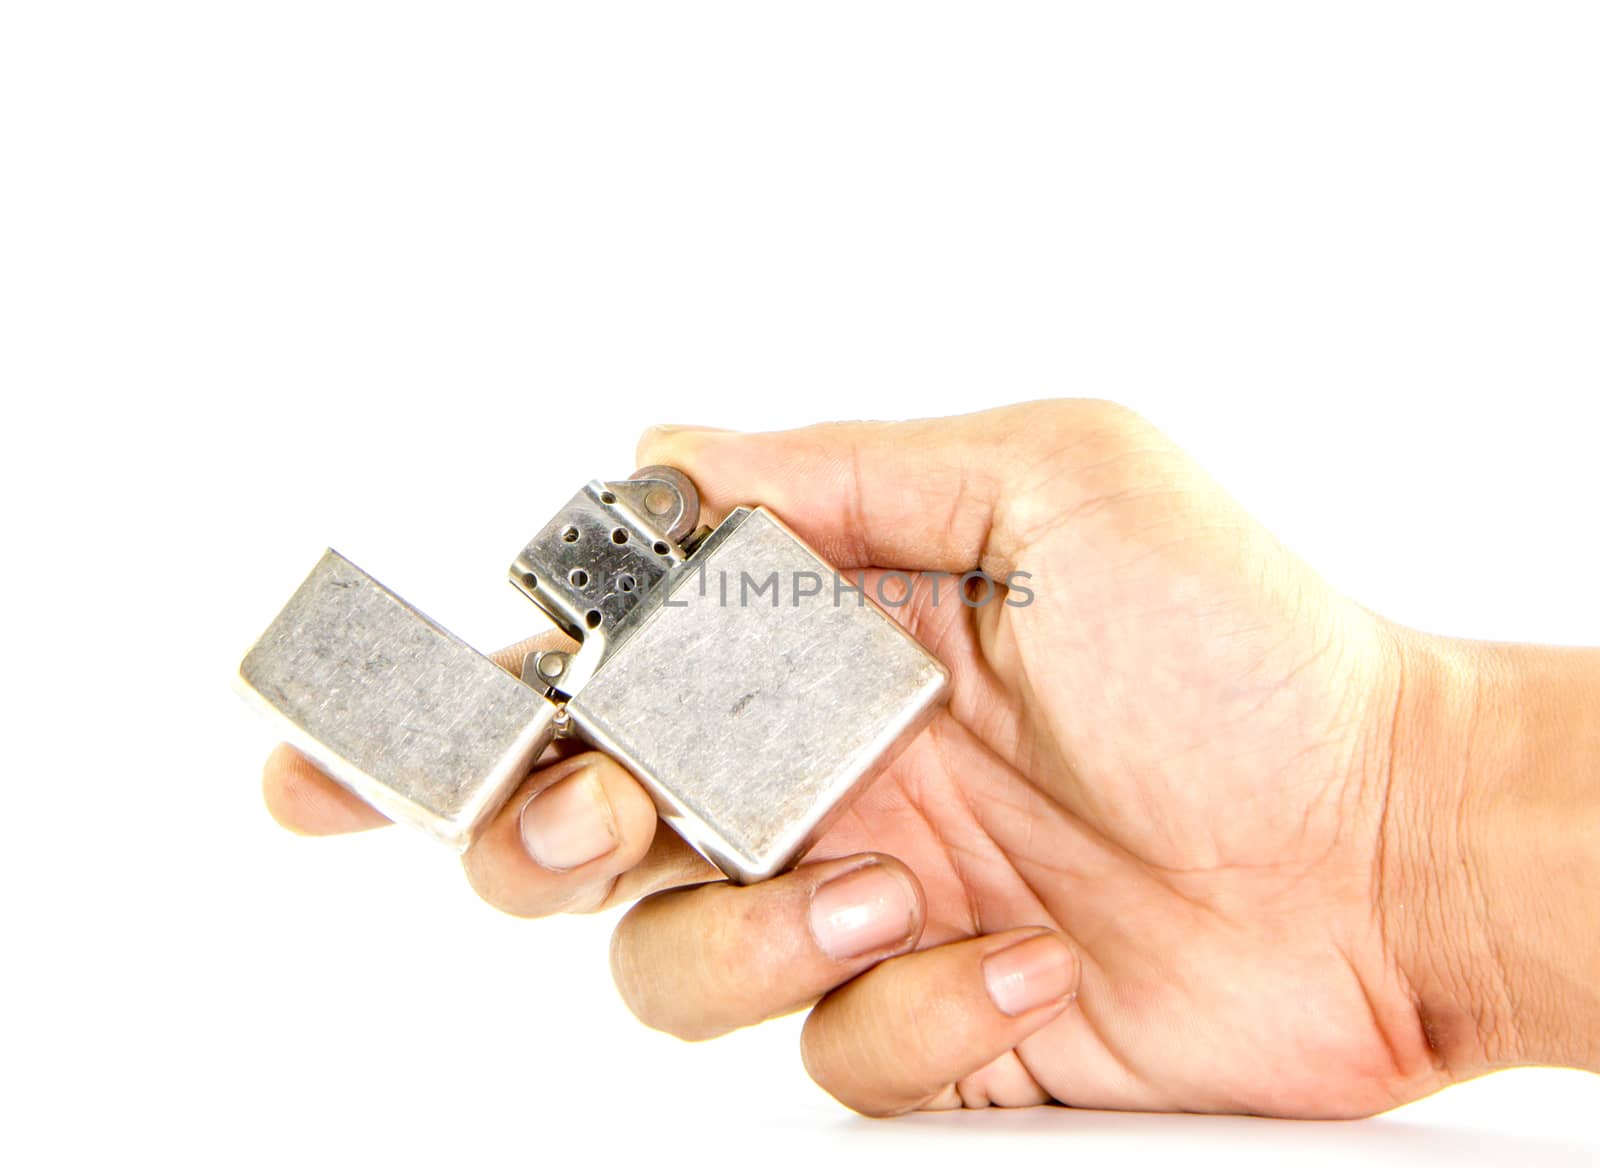 classic silver gasoline lighter in man hand  by bunwit